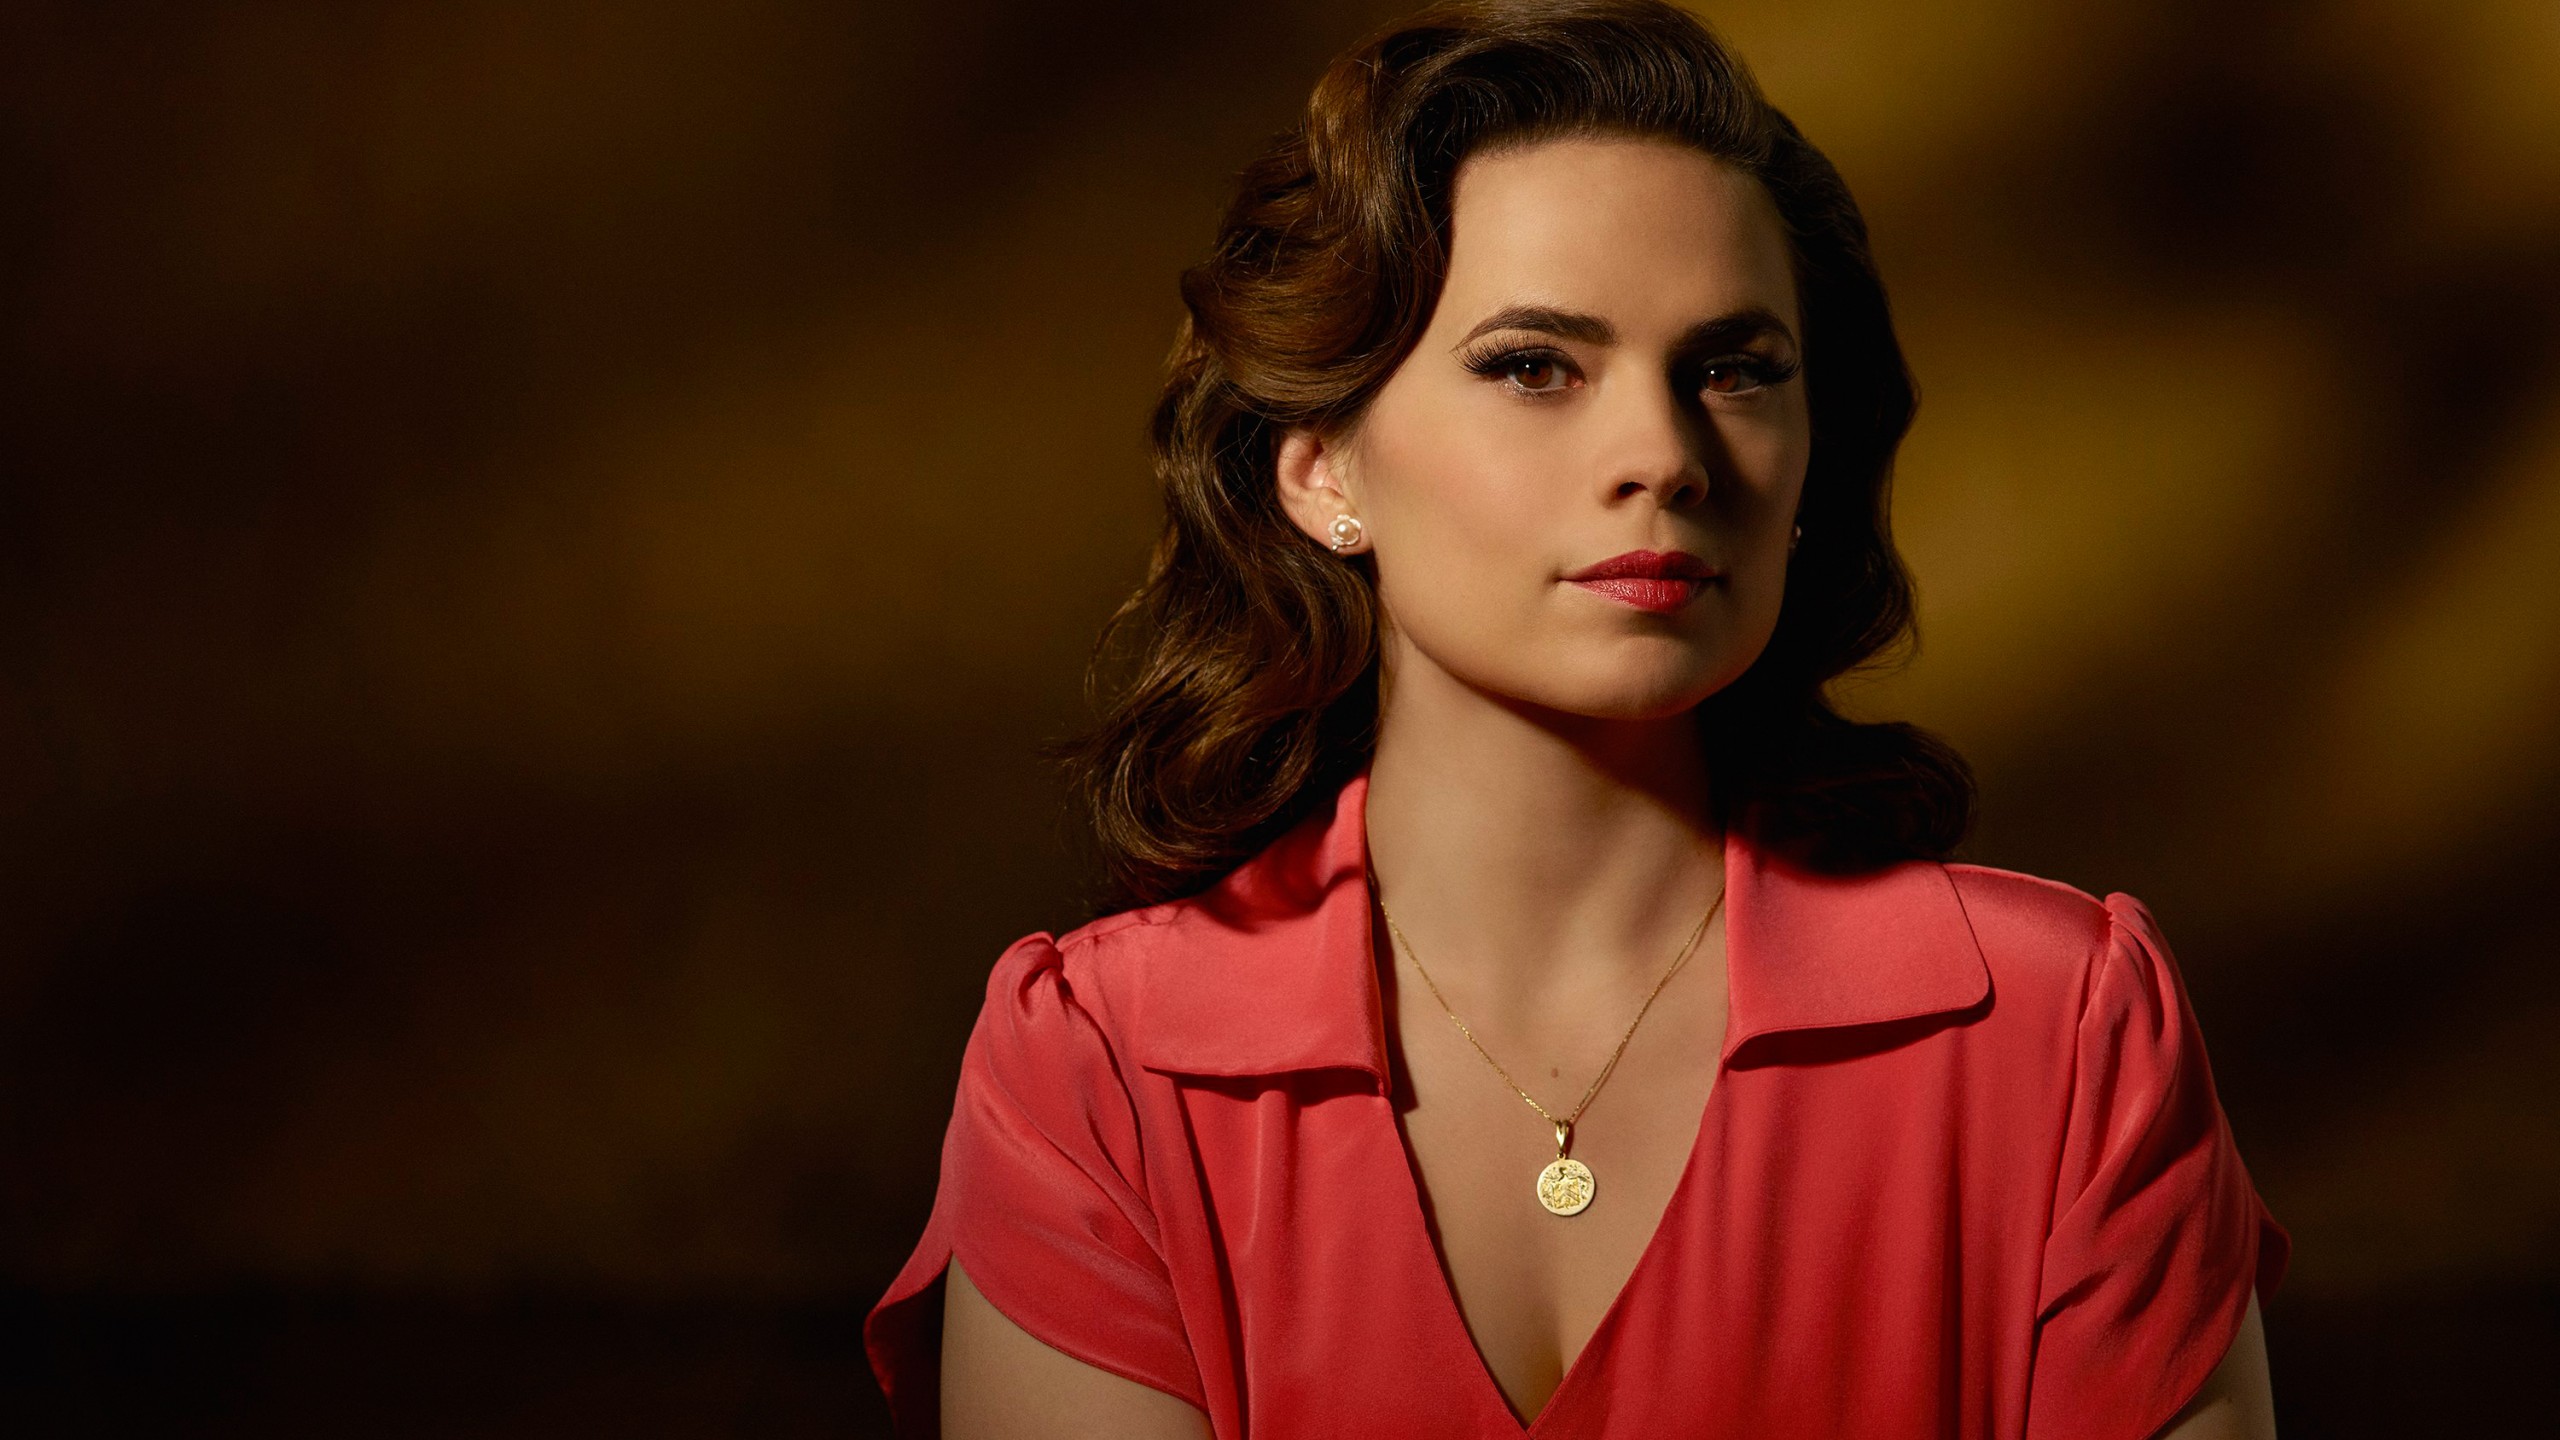 agent carter wallpaper,hair,face,red,beauty,hairstyle